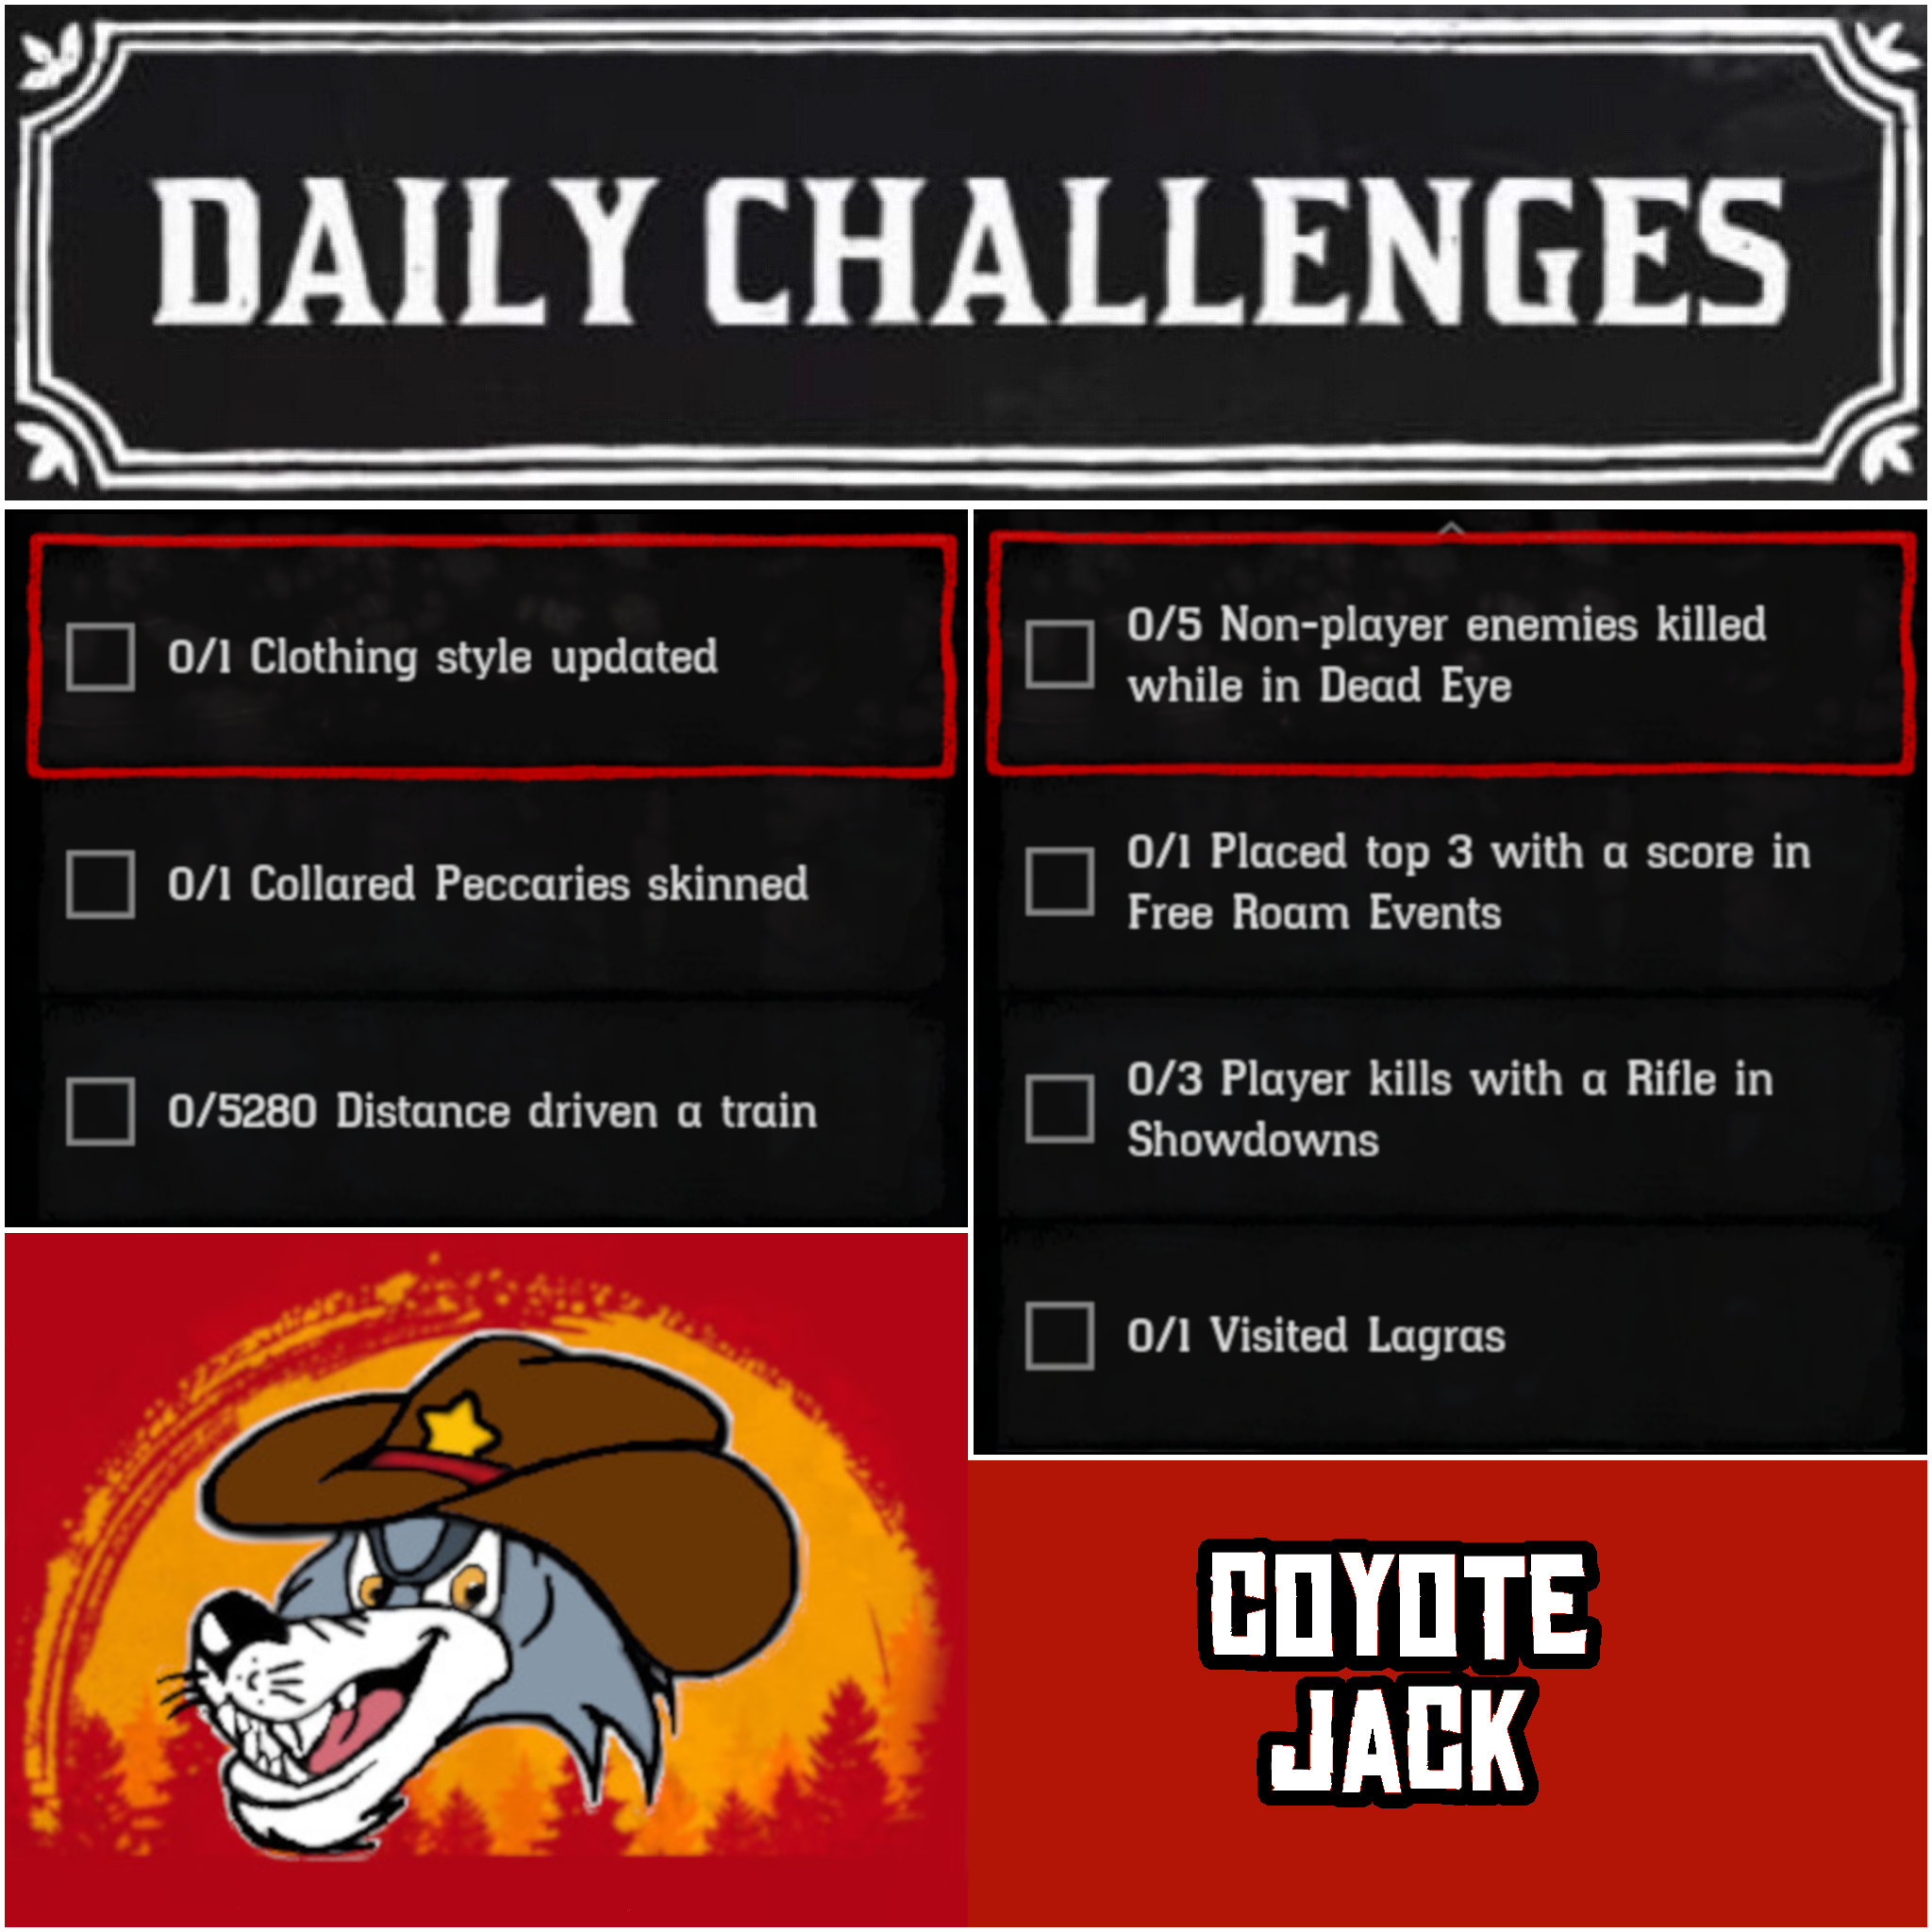 You are currently viewing Thursday 19 November Daily Challenges